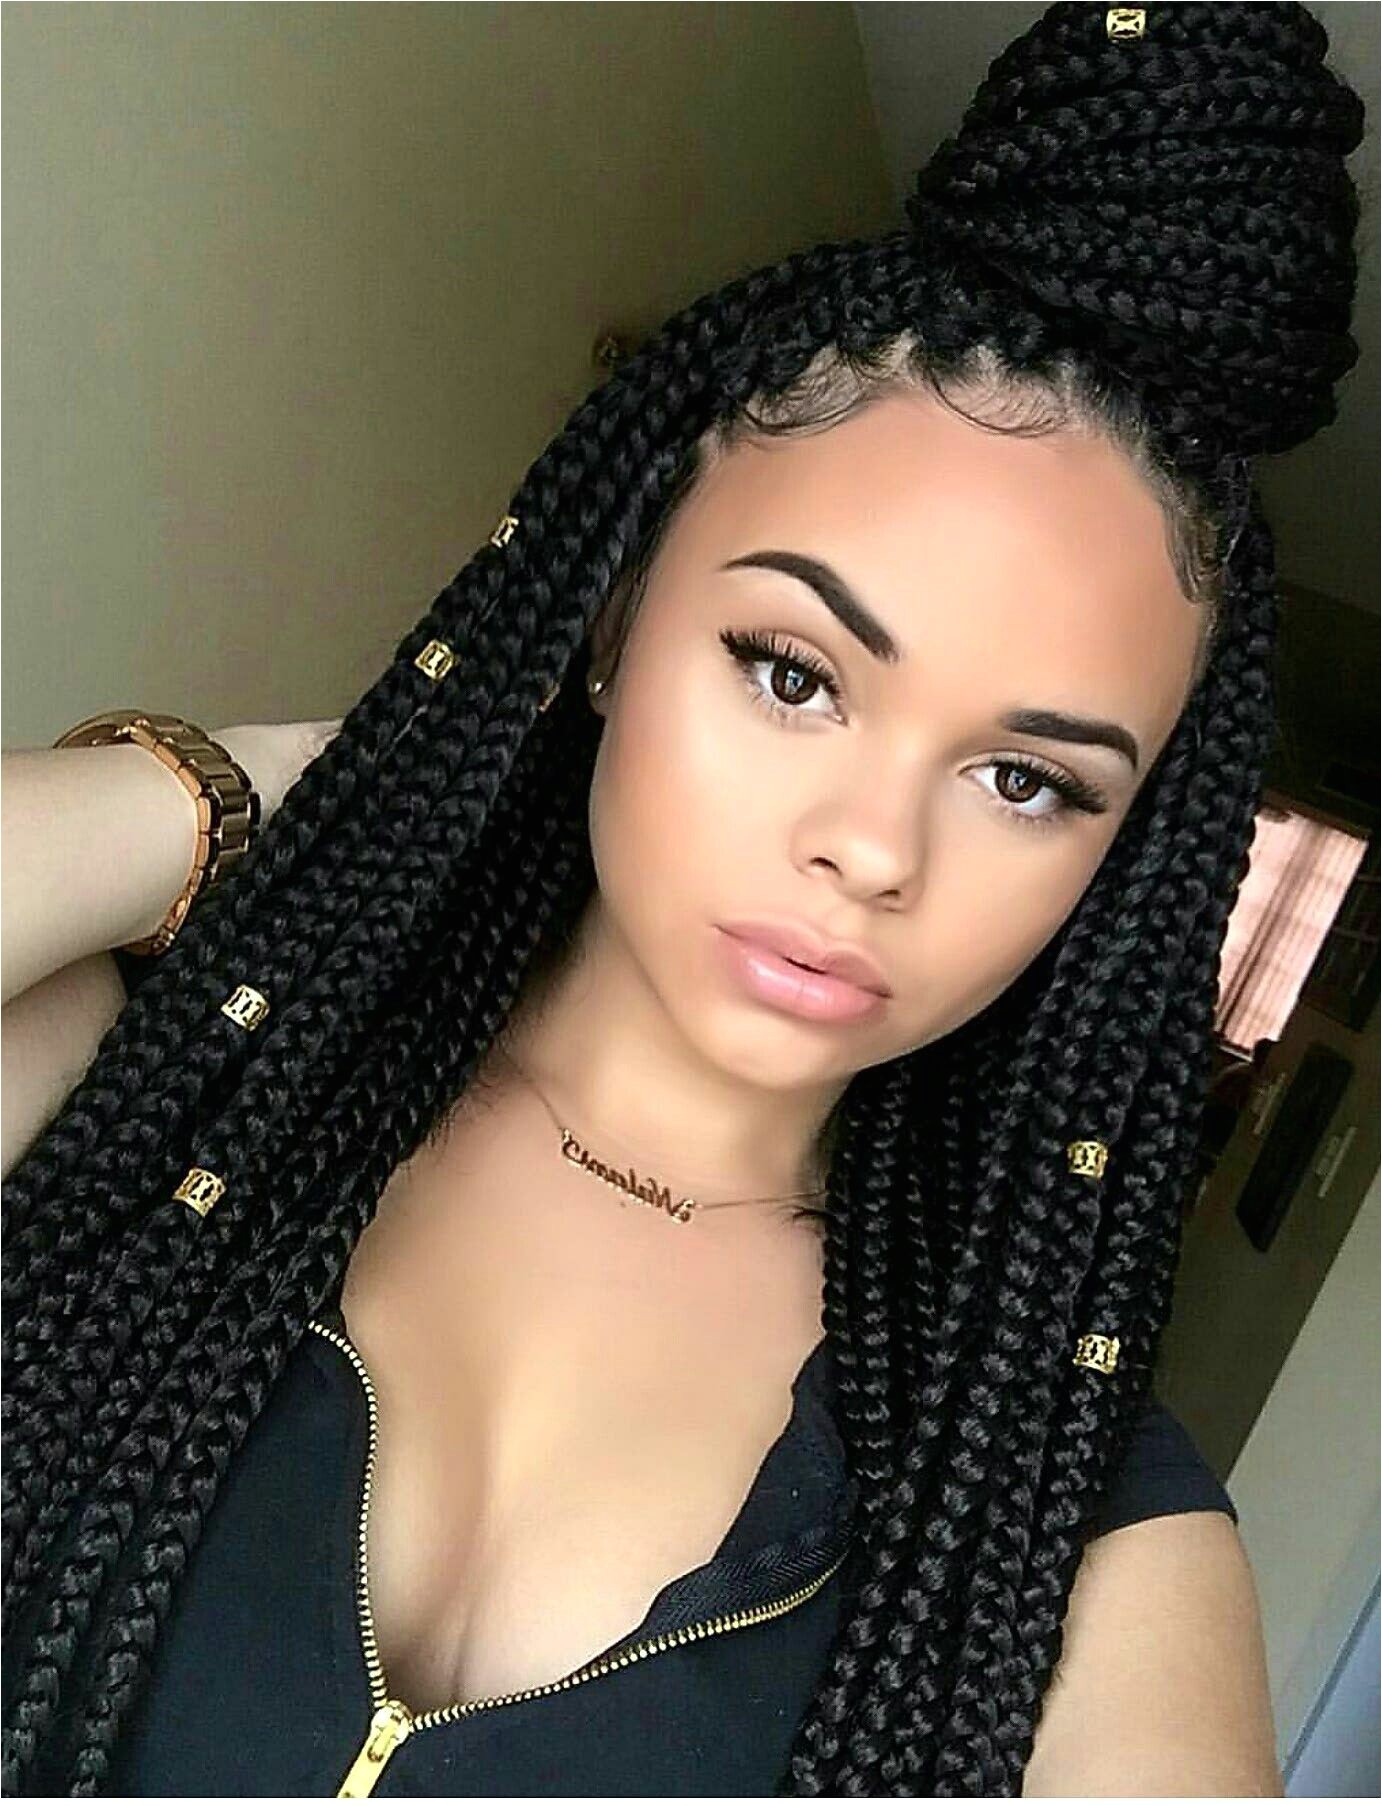 This Crochet Box Braid Tutorial will provide you with an awesome protective style in less time than it takes to install regular box braids